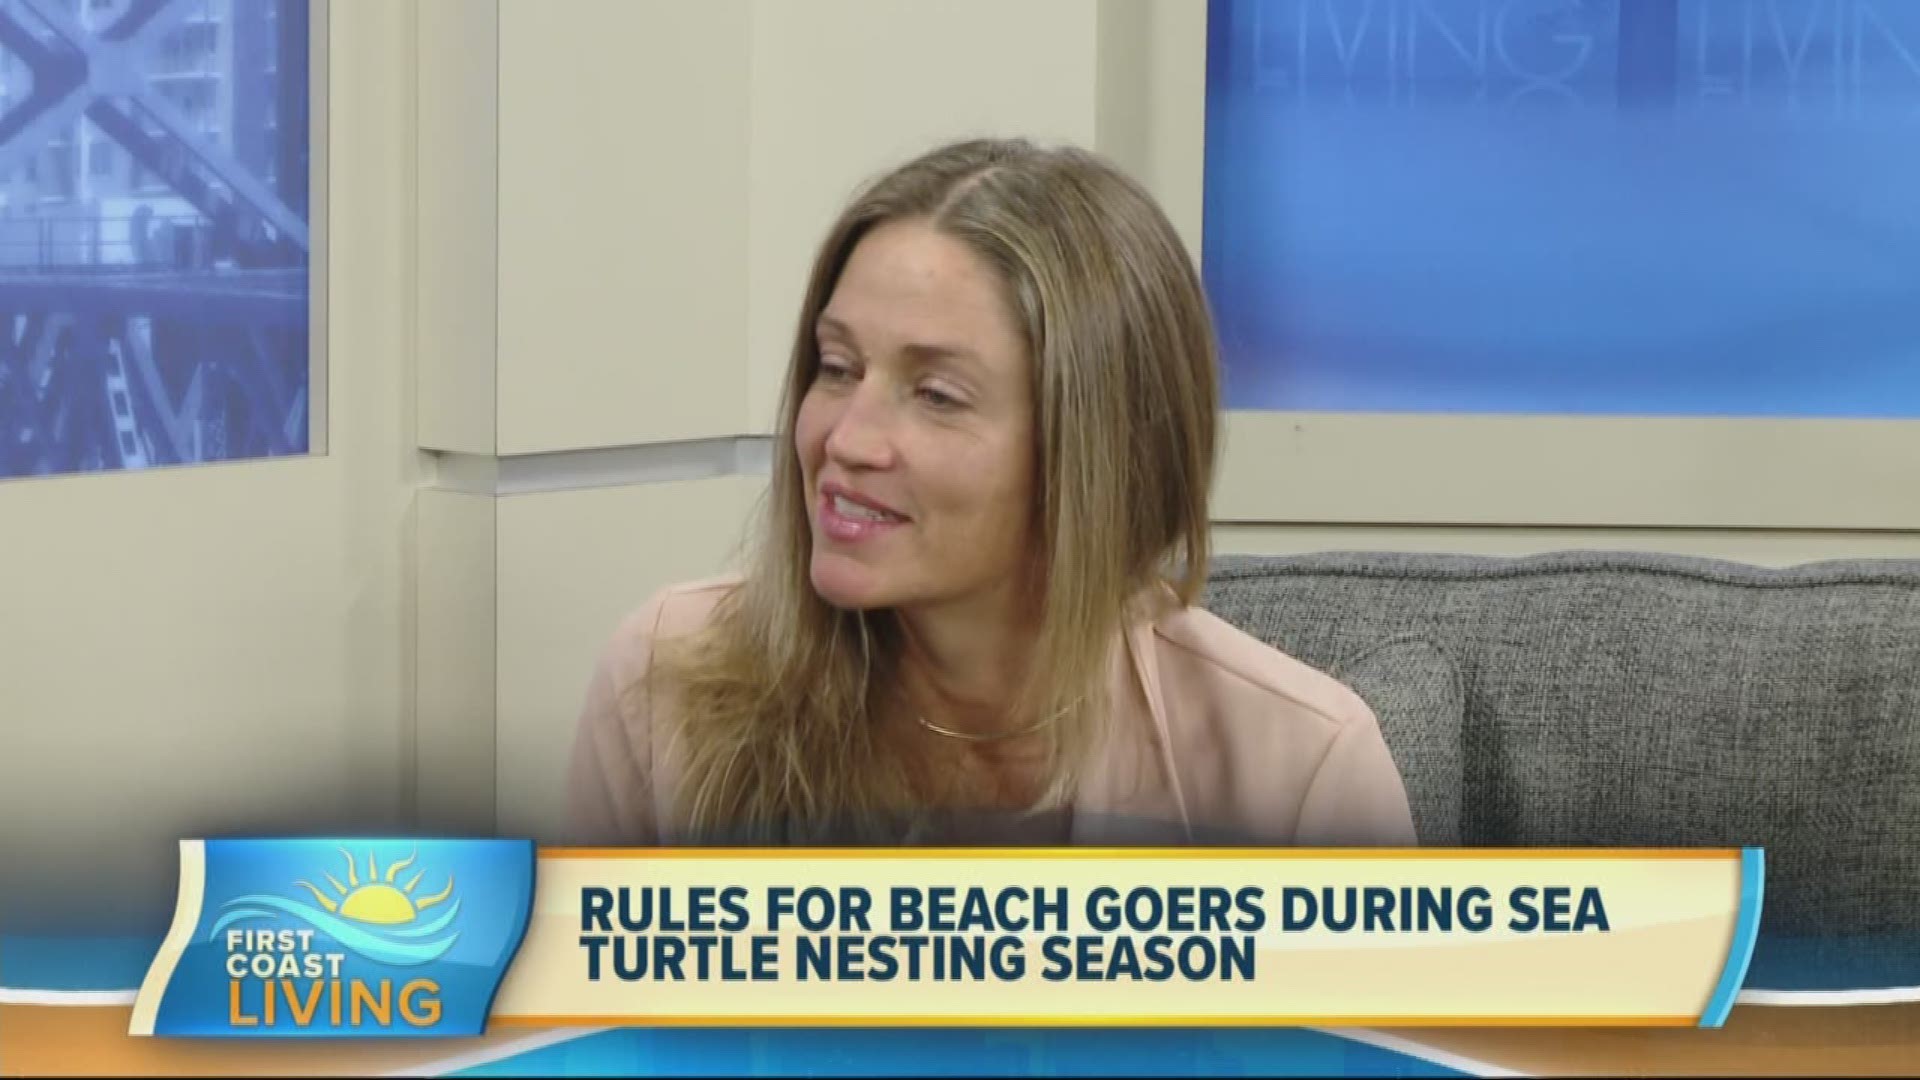 What you can do to help make sure sea turtles stay safe during nesting season during your next beach trip.